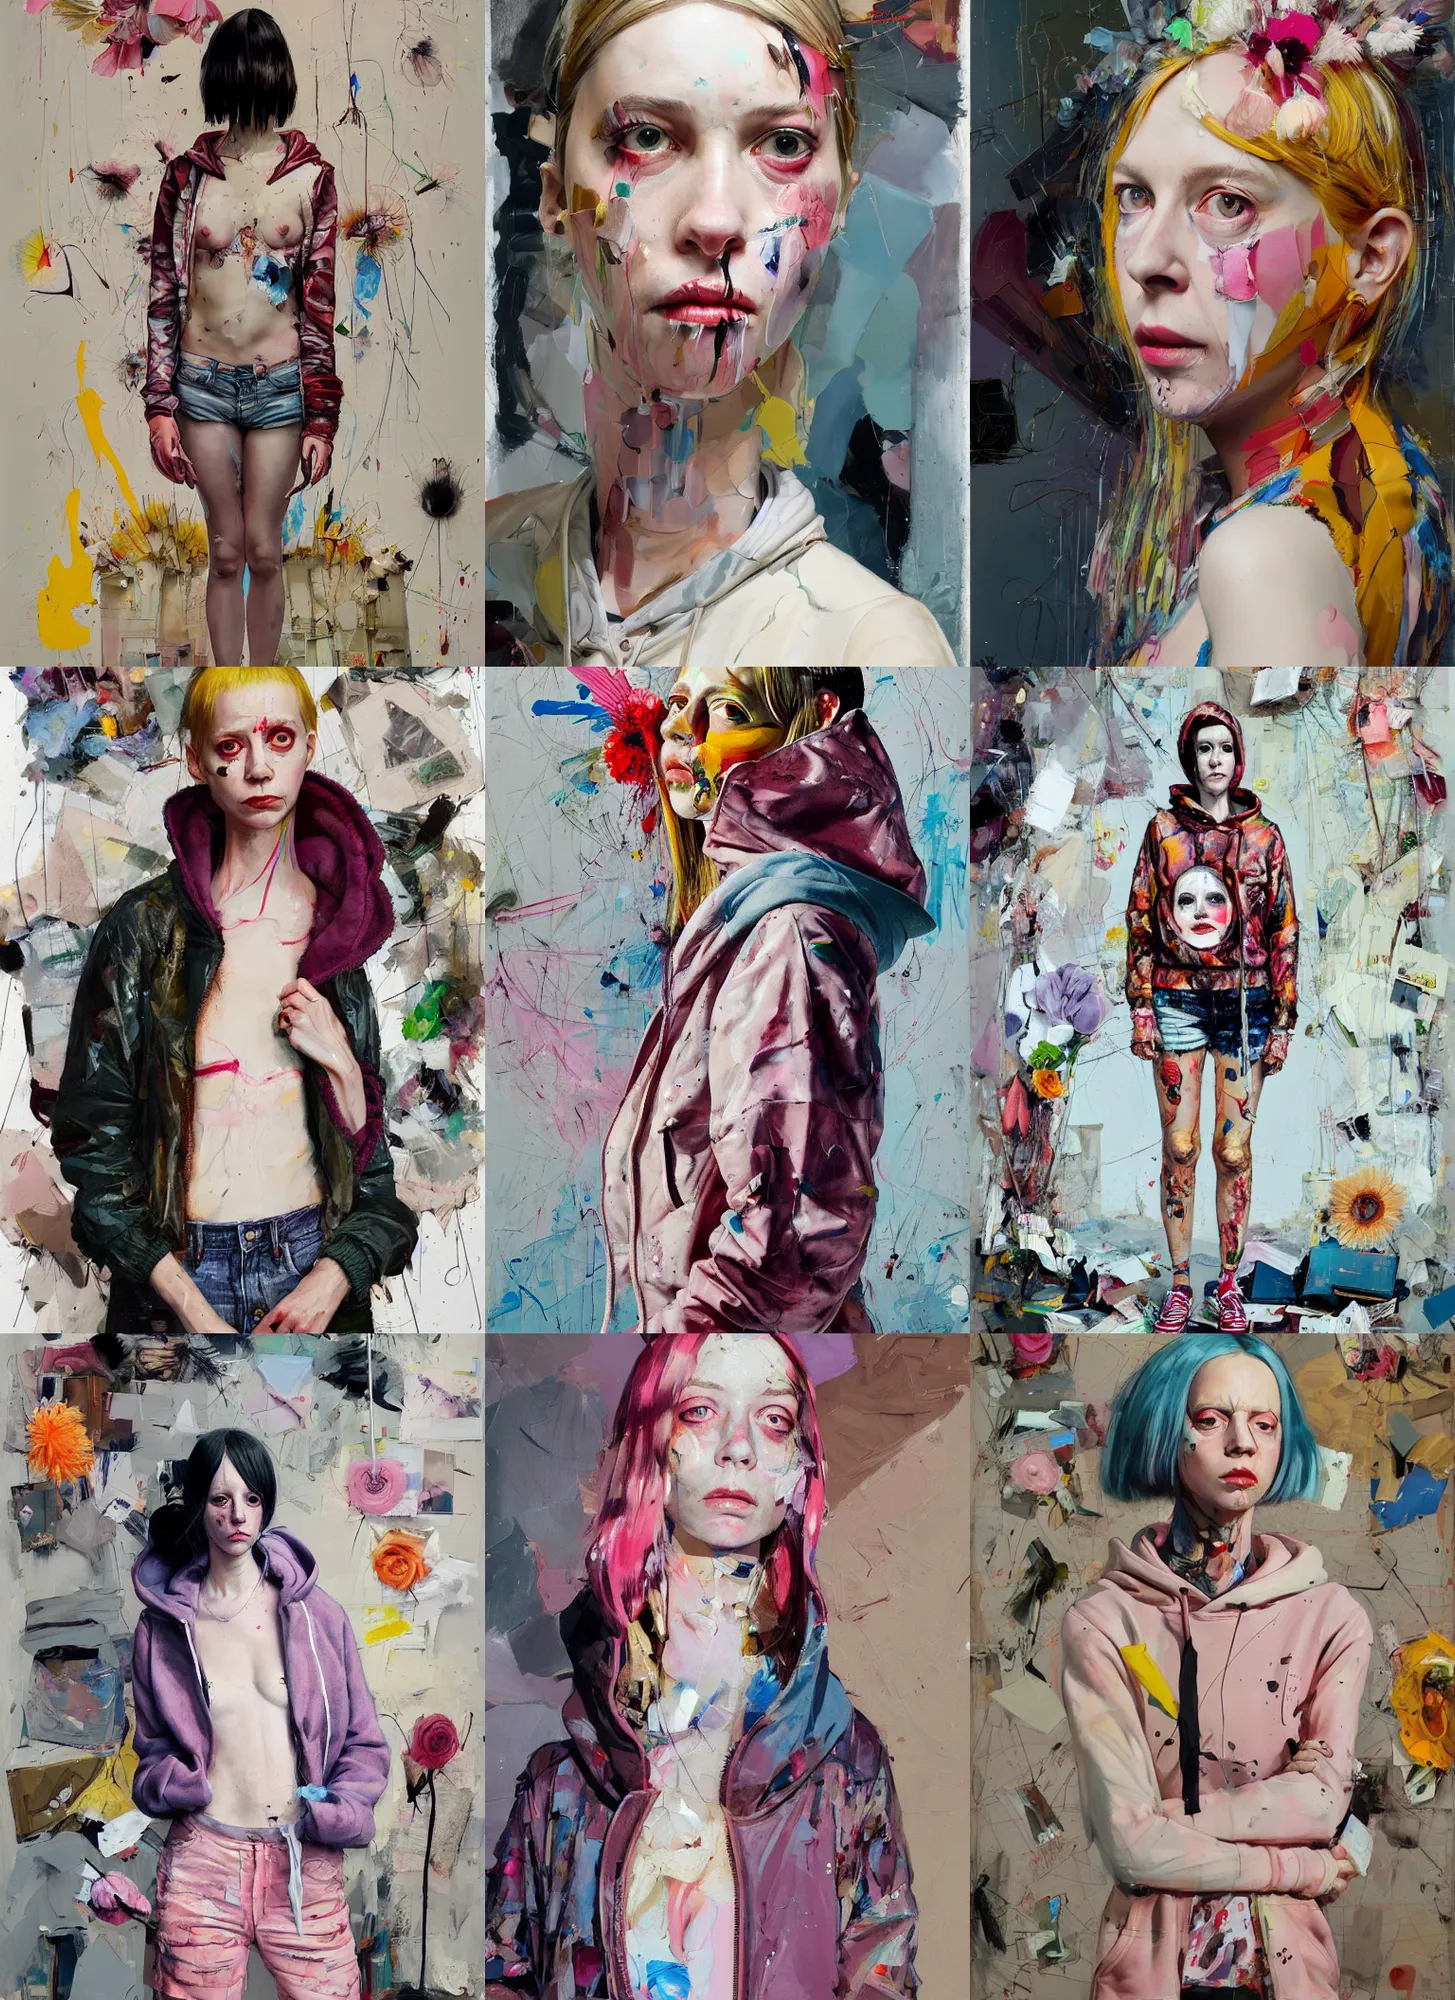 Prompt: margot tenenbaum in the style of martine johanna and! jenny saville!, wearing a hoodie, standing in a township street, street fashion outfit, haute couture fashion shoot, full figure painting by john berkey, david choe, ismail inceoglu, decorative flowers, 2 4 mm, die antwoord ( yolandi visser )